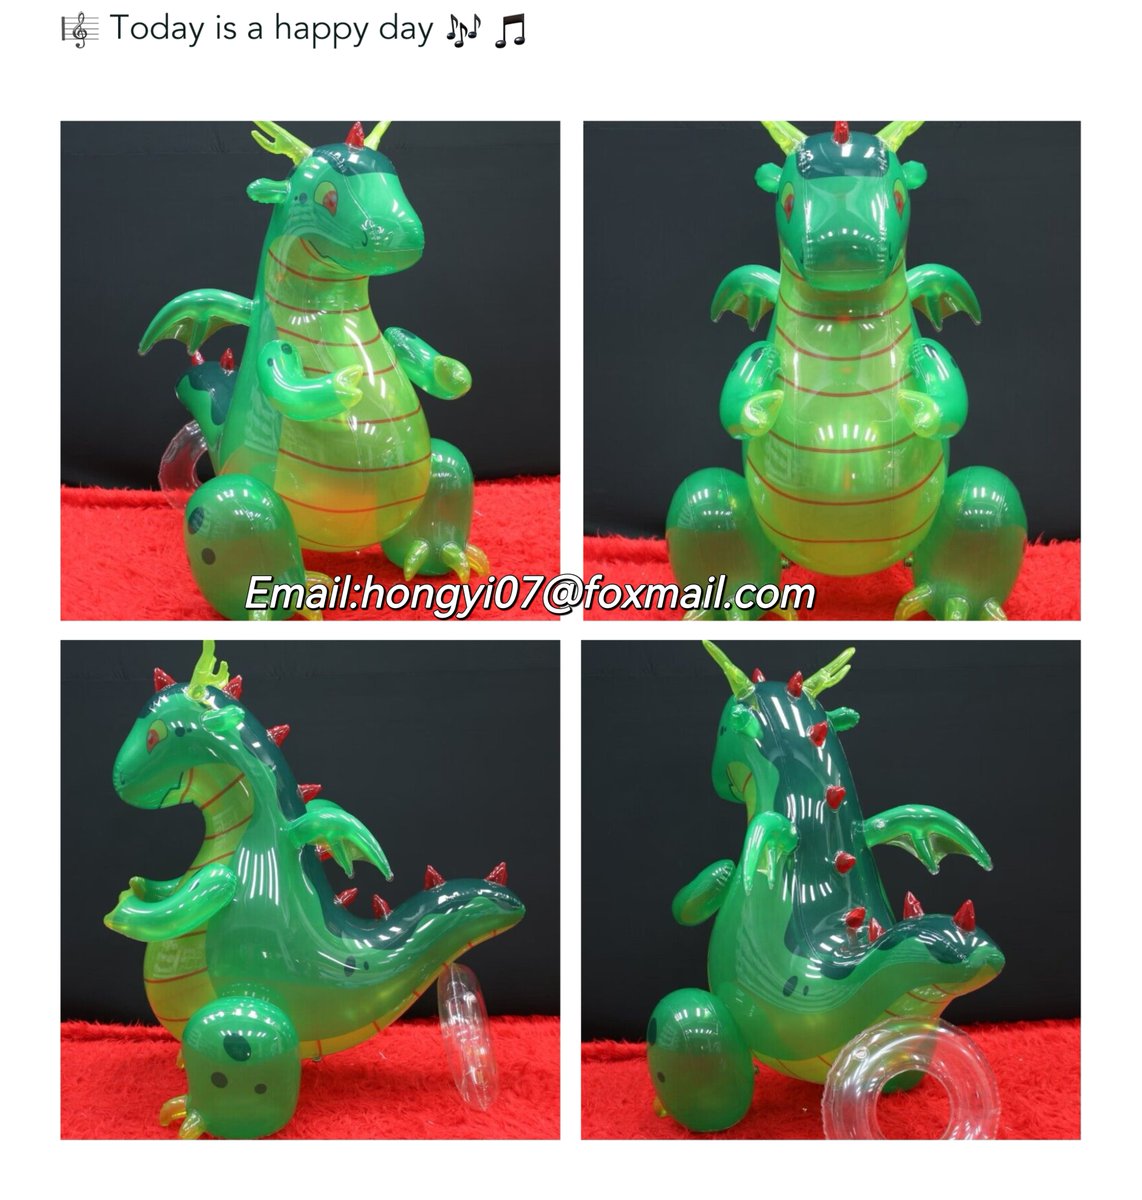 Today is Friday, are you ready for #squeakysaturday ?
Any interests in this lovely dragon, please email:hongyi07@foxmail.com

#inflatabledragon #greendragon #inflatabledino #inflatableanimals #airtoy #hongyi